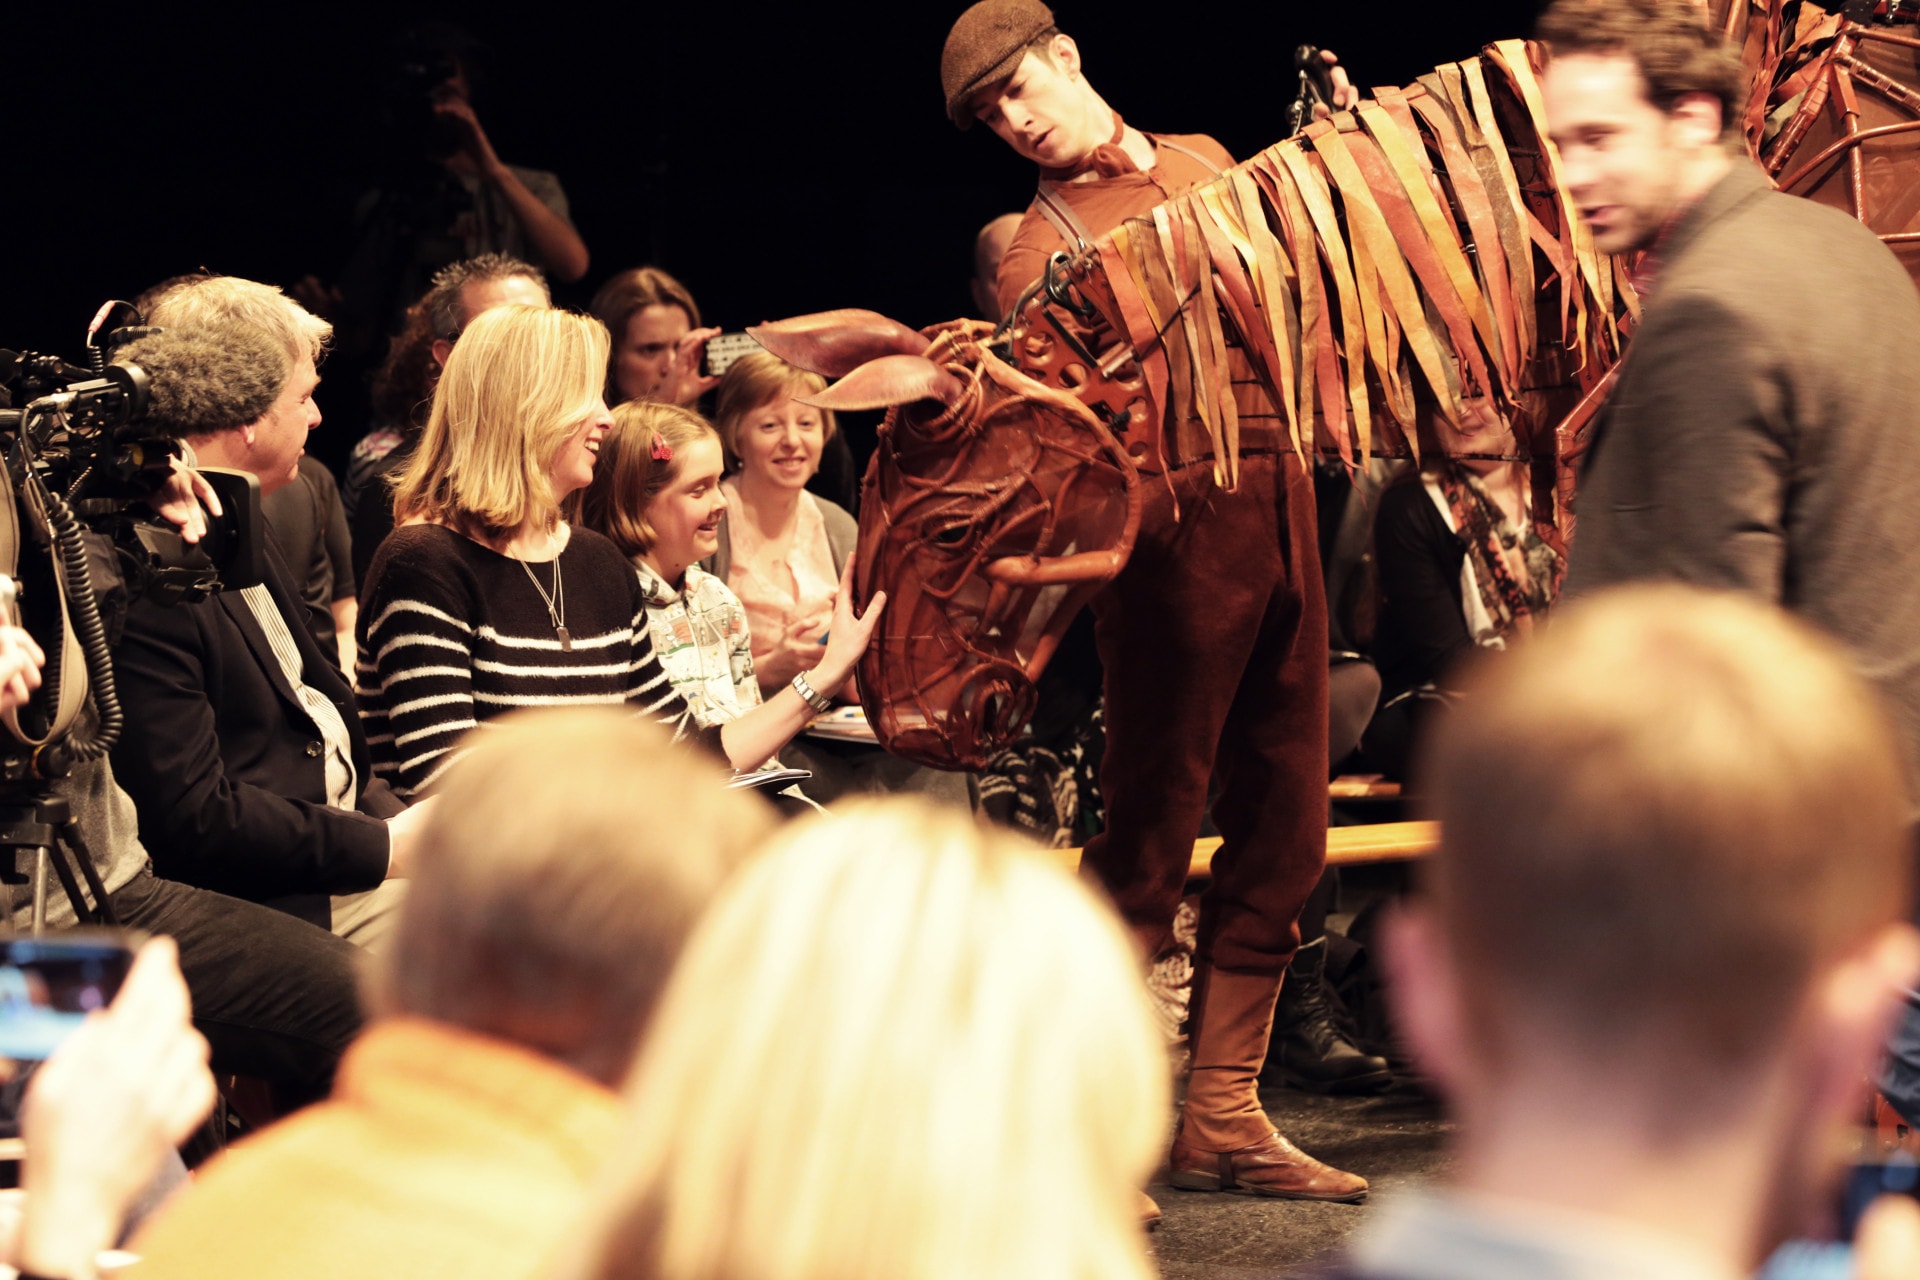 Image of Joey the horse, from War Horse's national tour launch